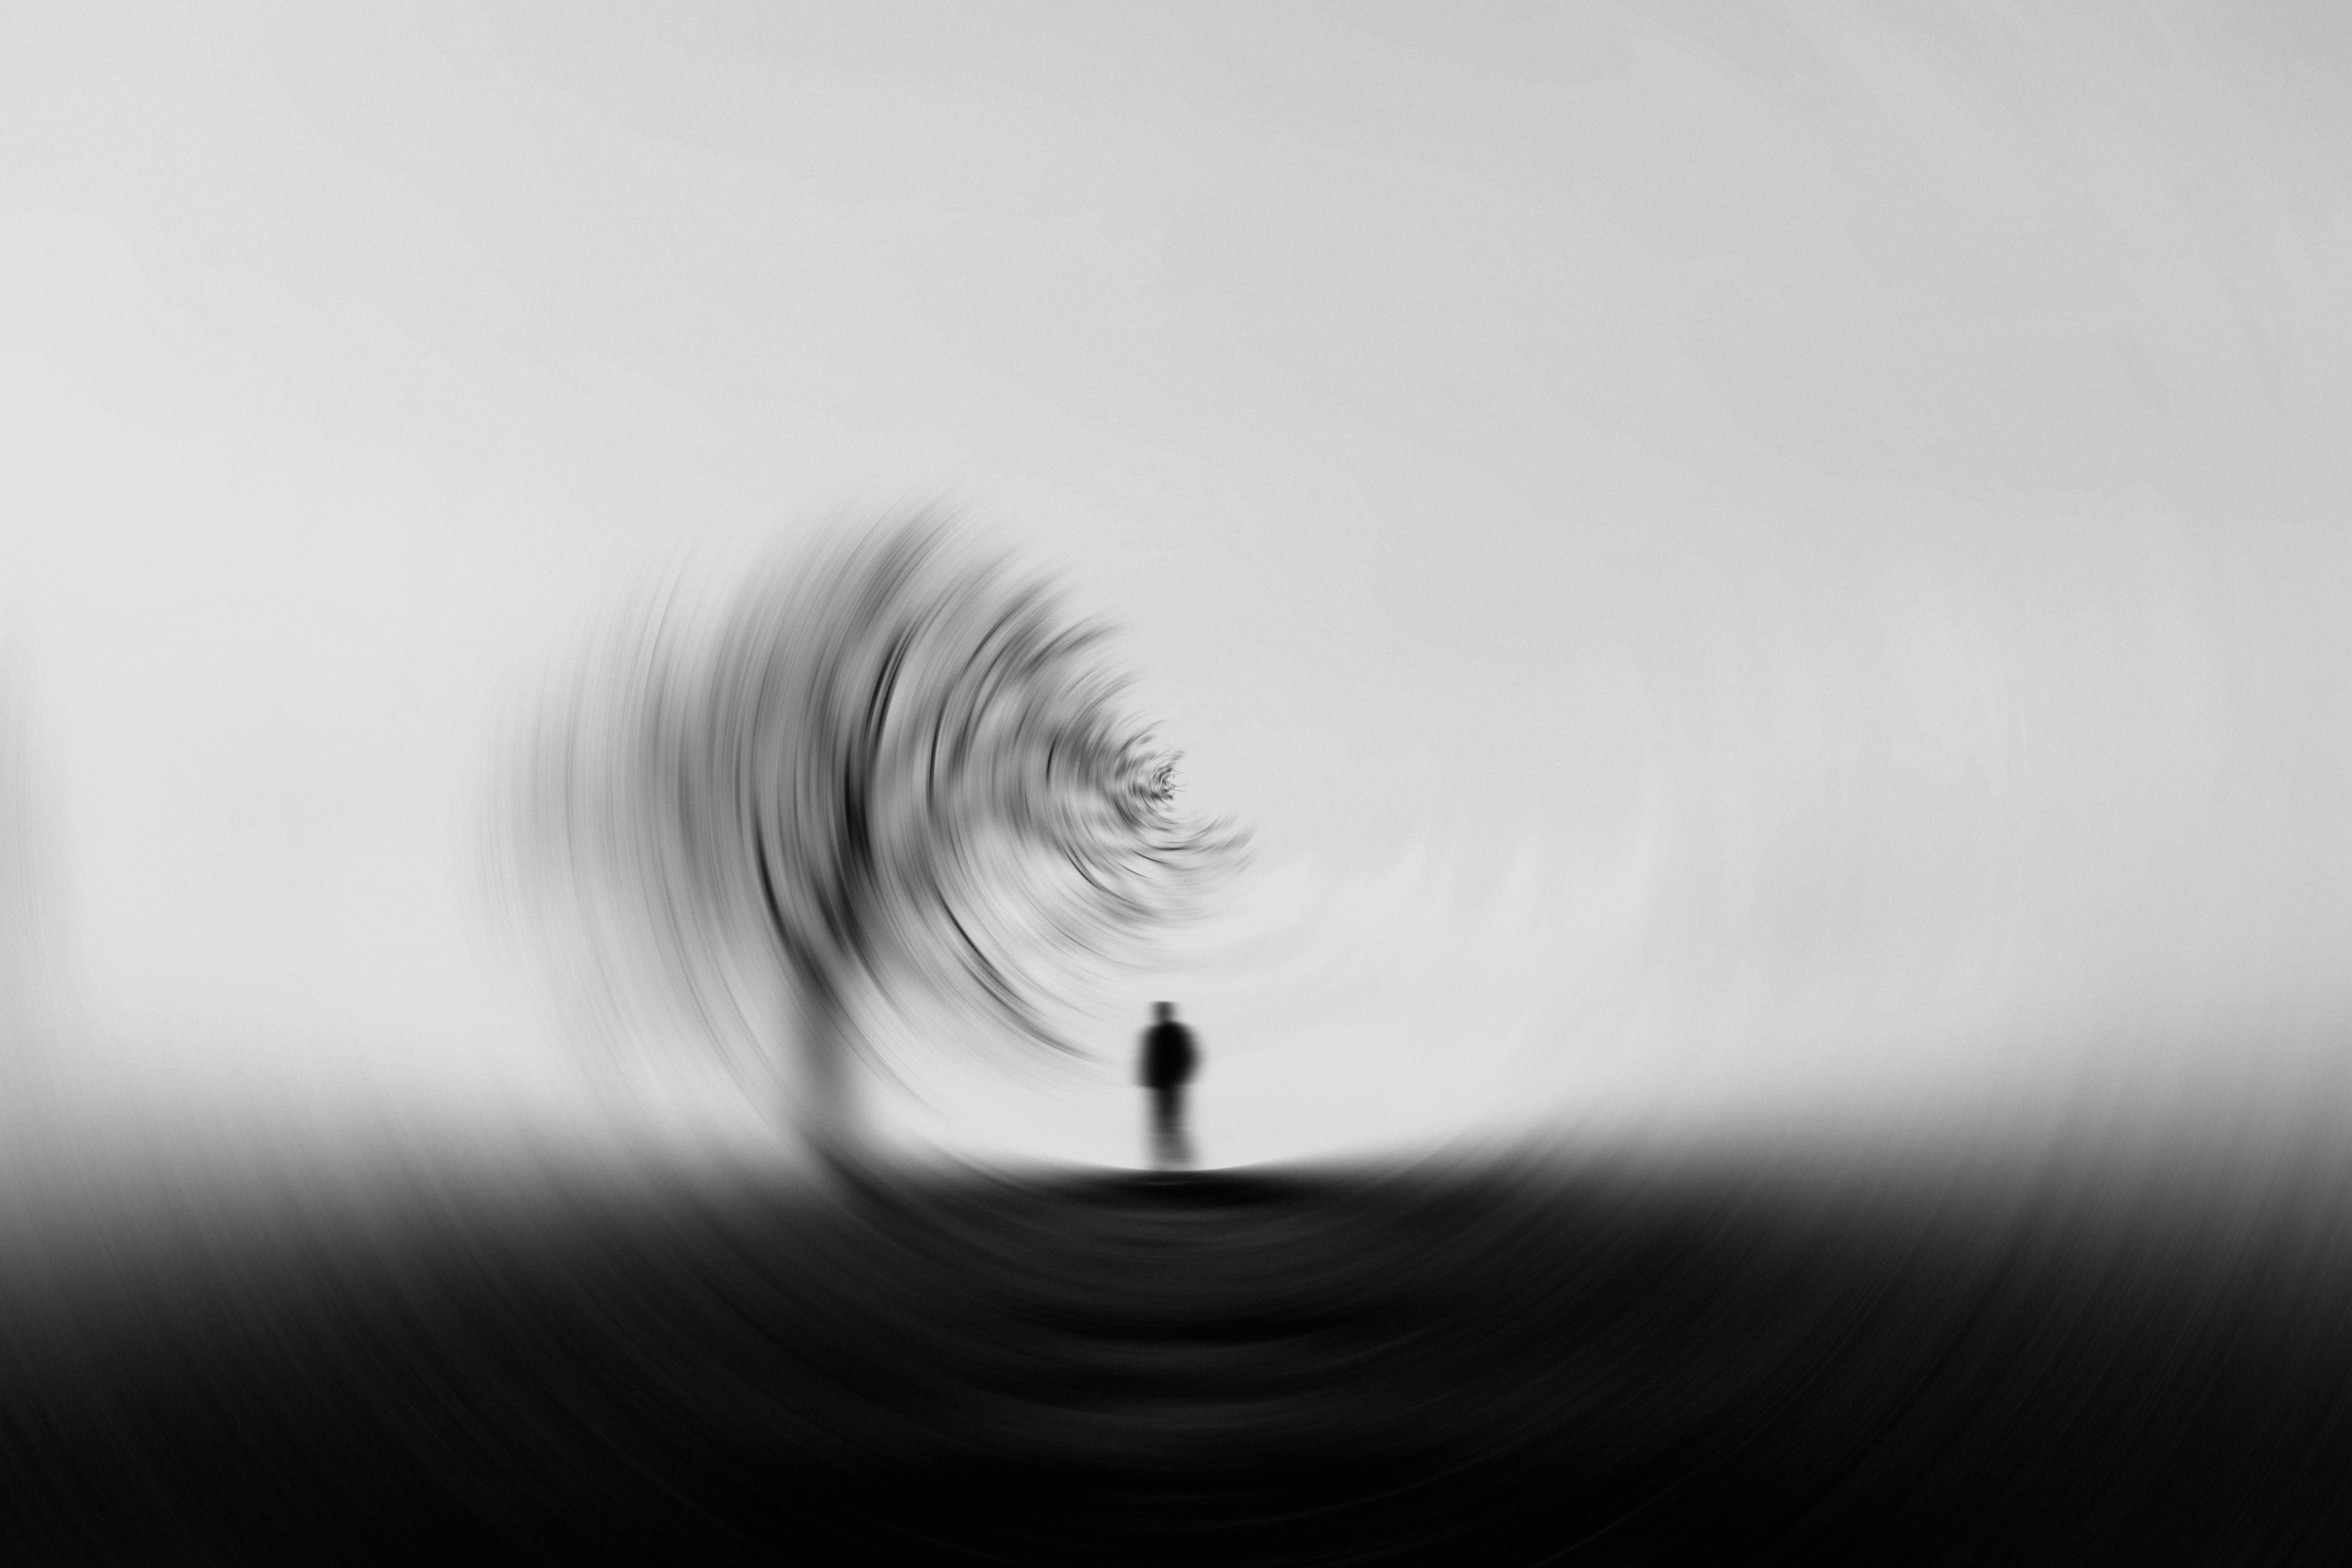 silhouette, bw, chb, smooth, blur, miscellanea, miscellaneous, wood, tree, effect